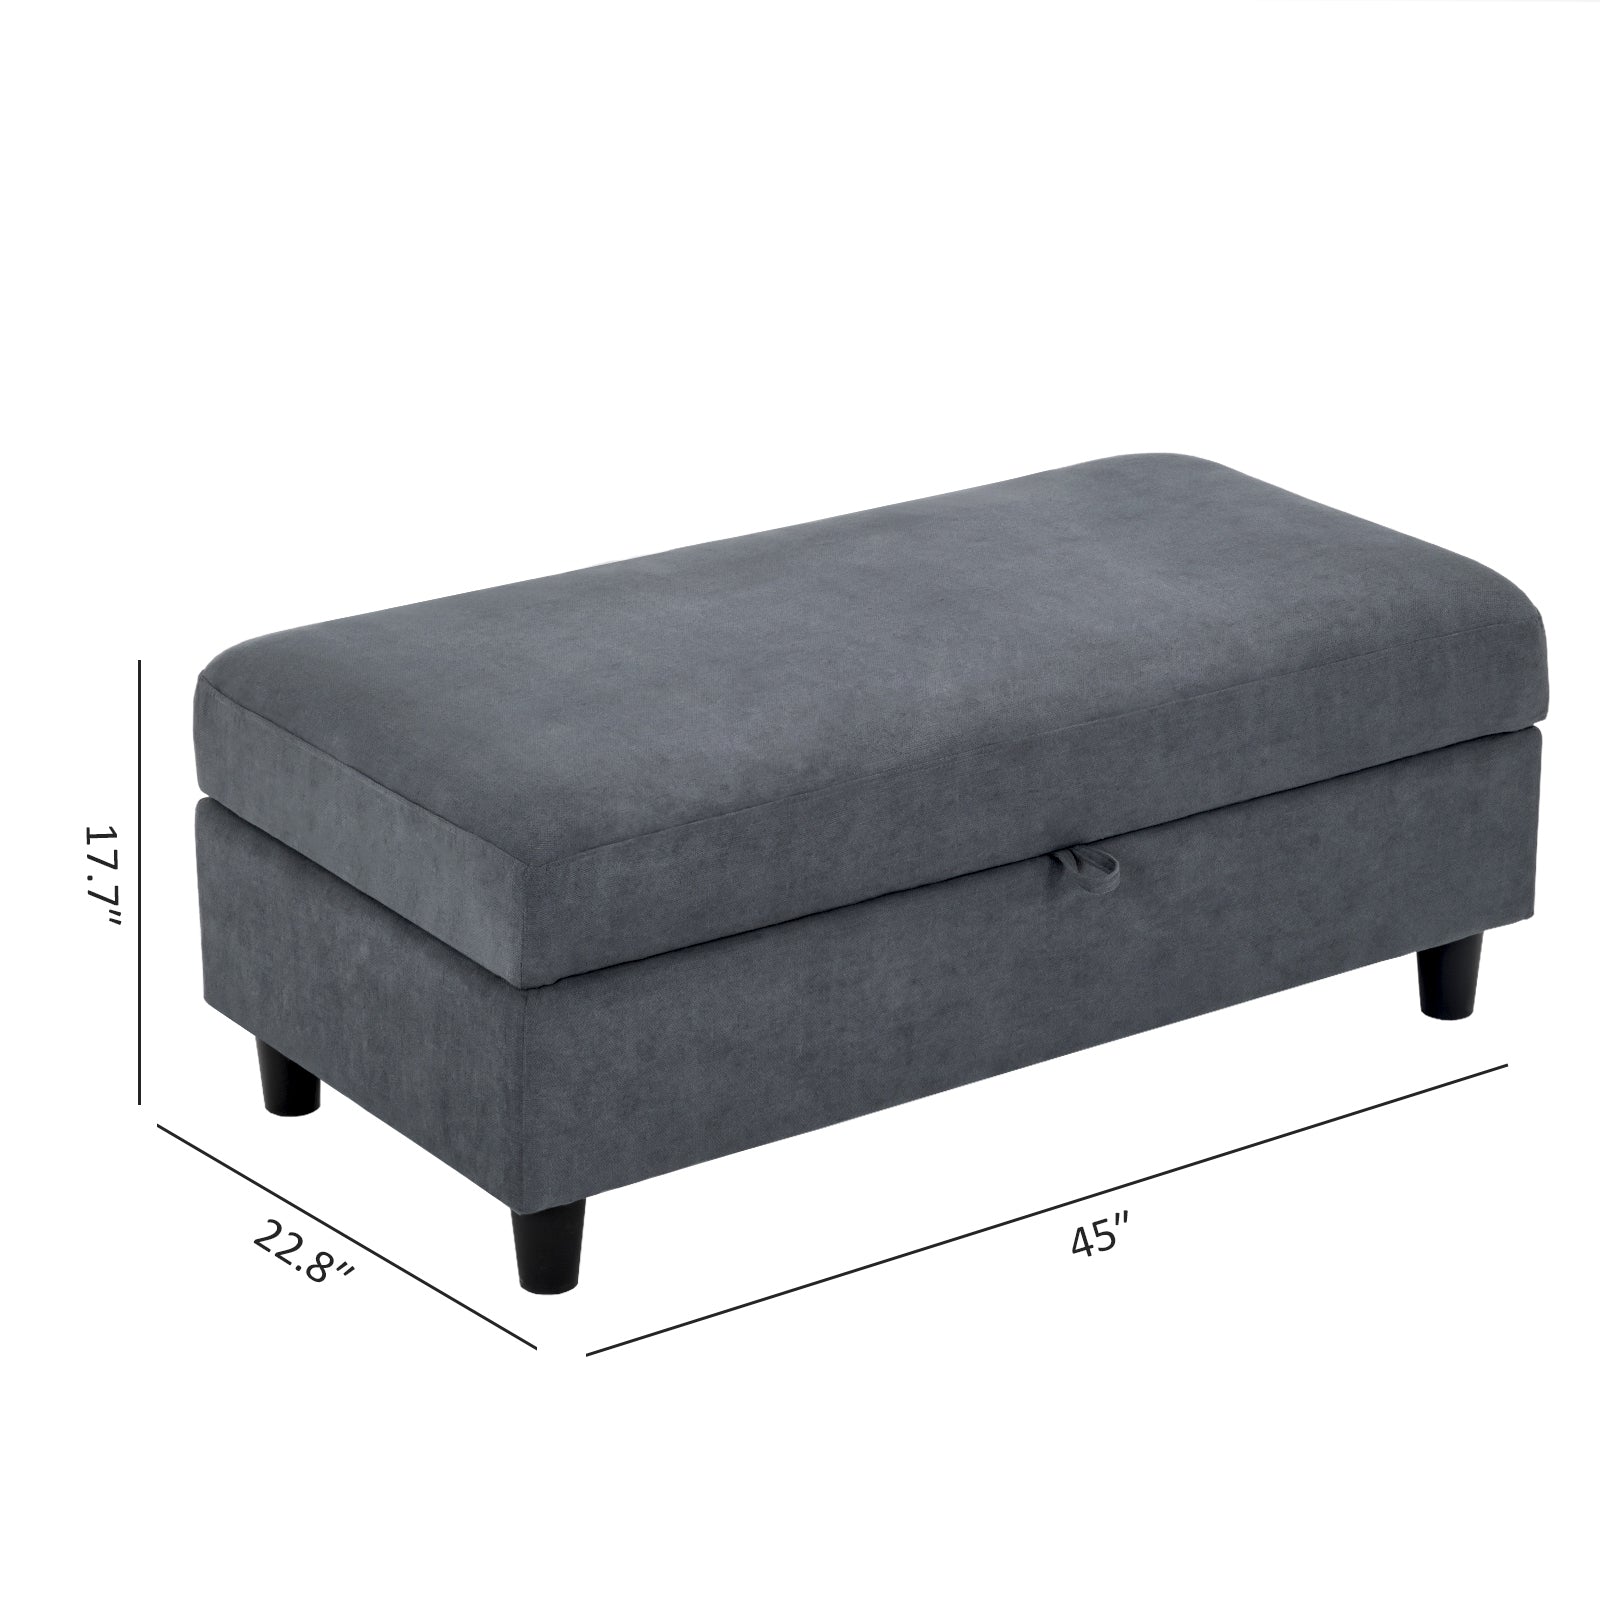 45 inch Upholstered Storage Bench Ottoman 